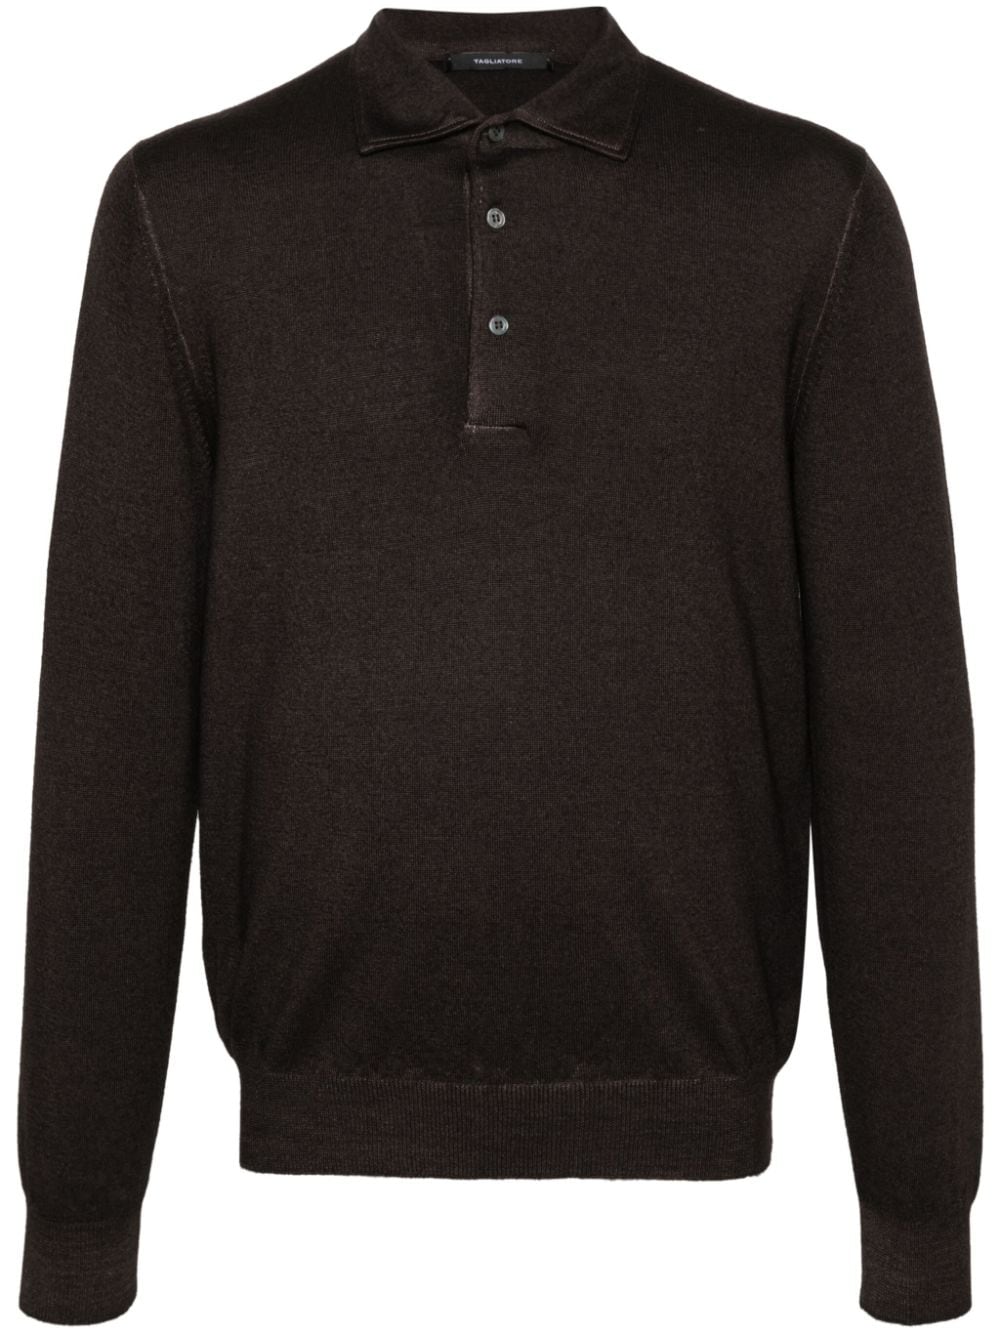 Image 1 of Tagliatore knitted polo shirt